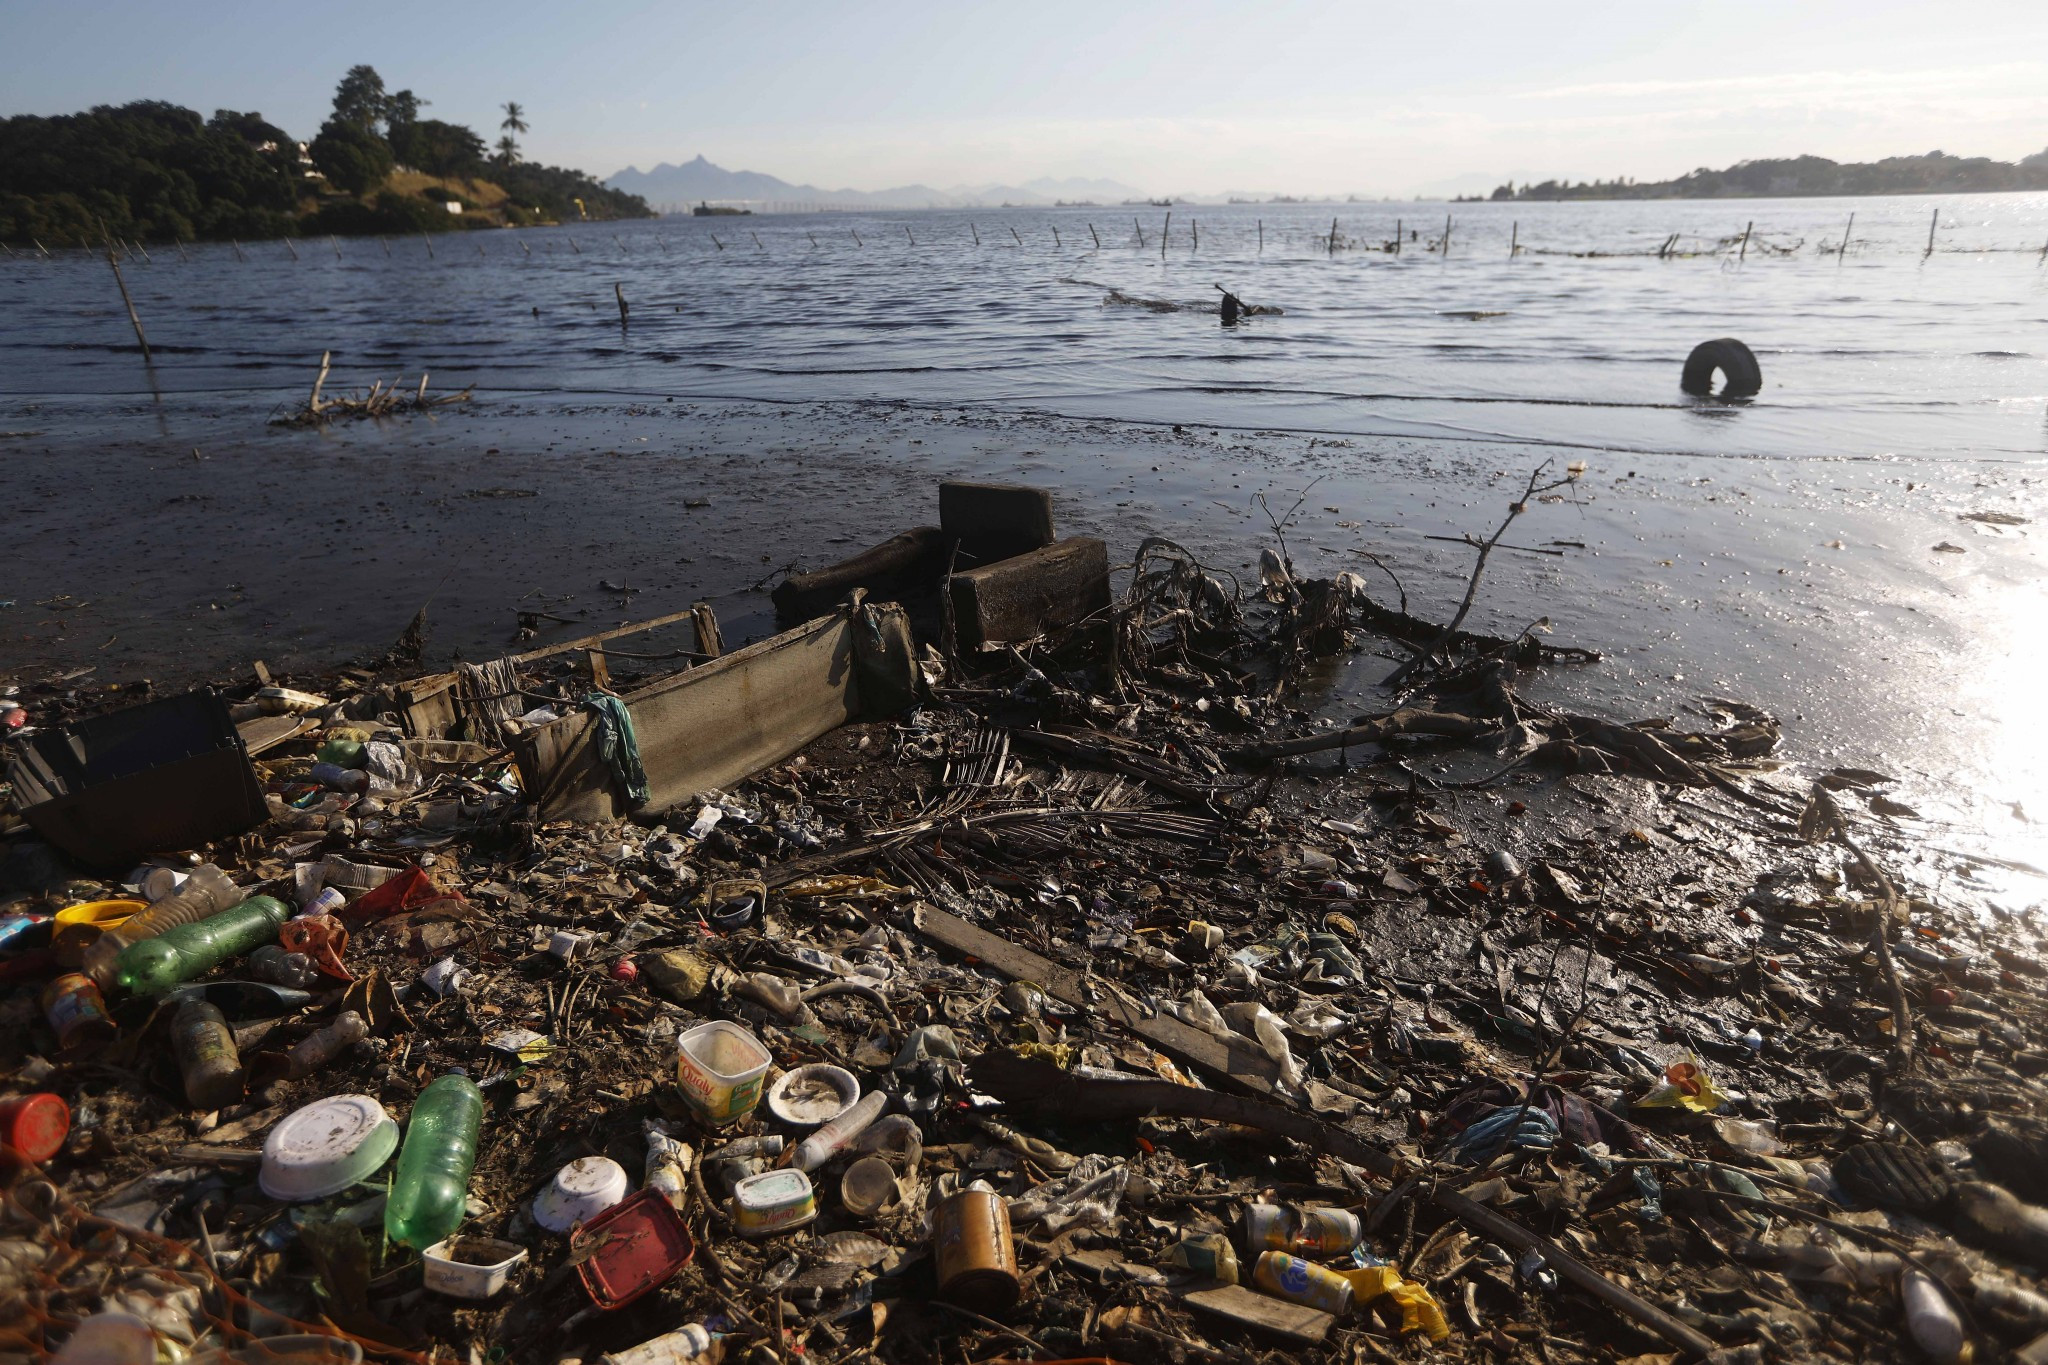 Protest held against Guanabara Bay water pollution one year on from Rio 2016